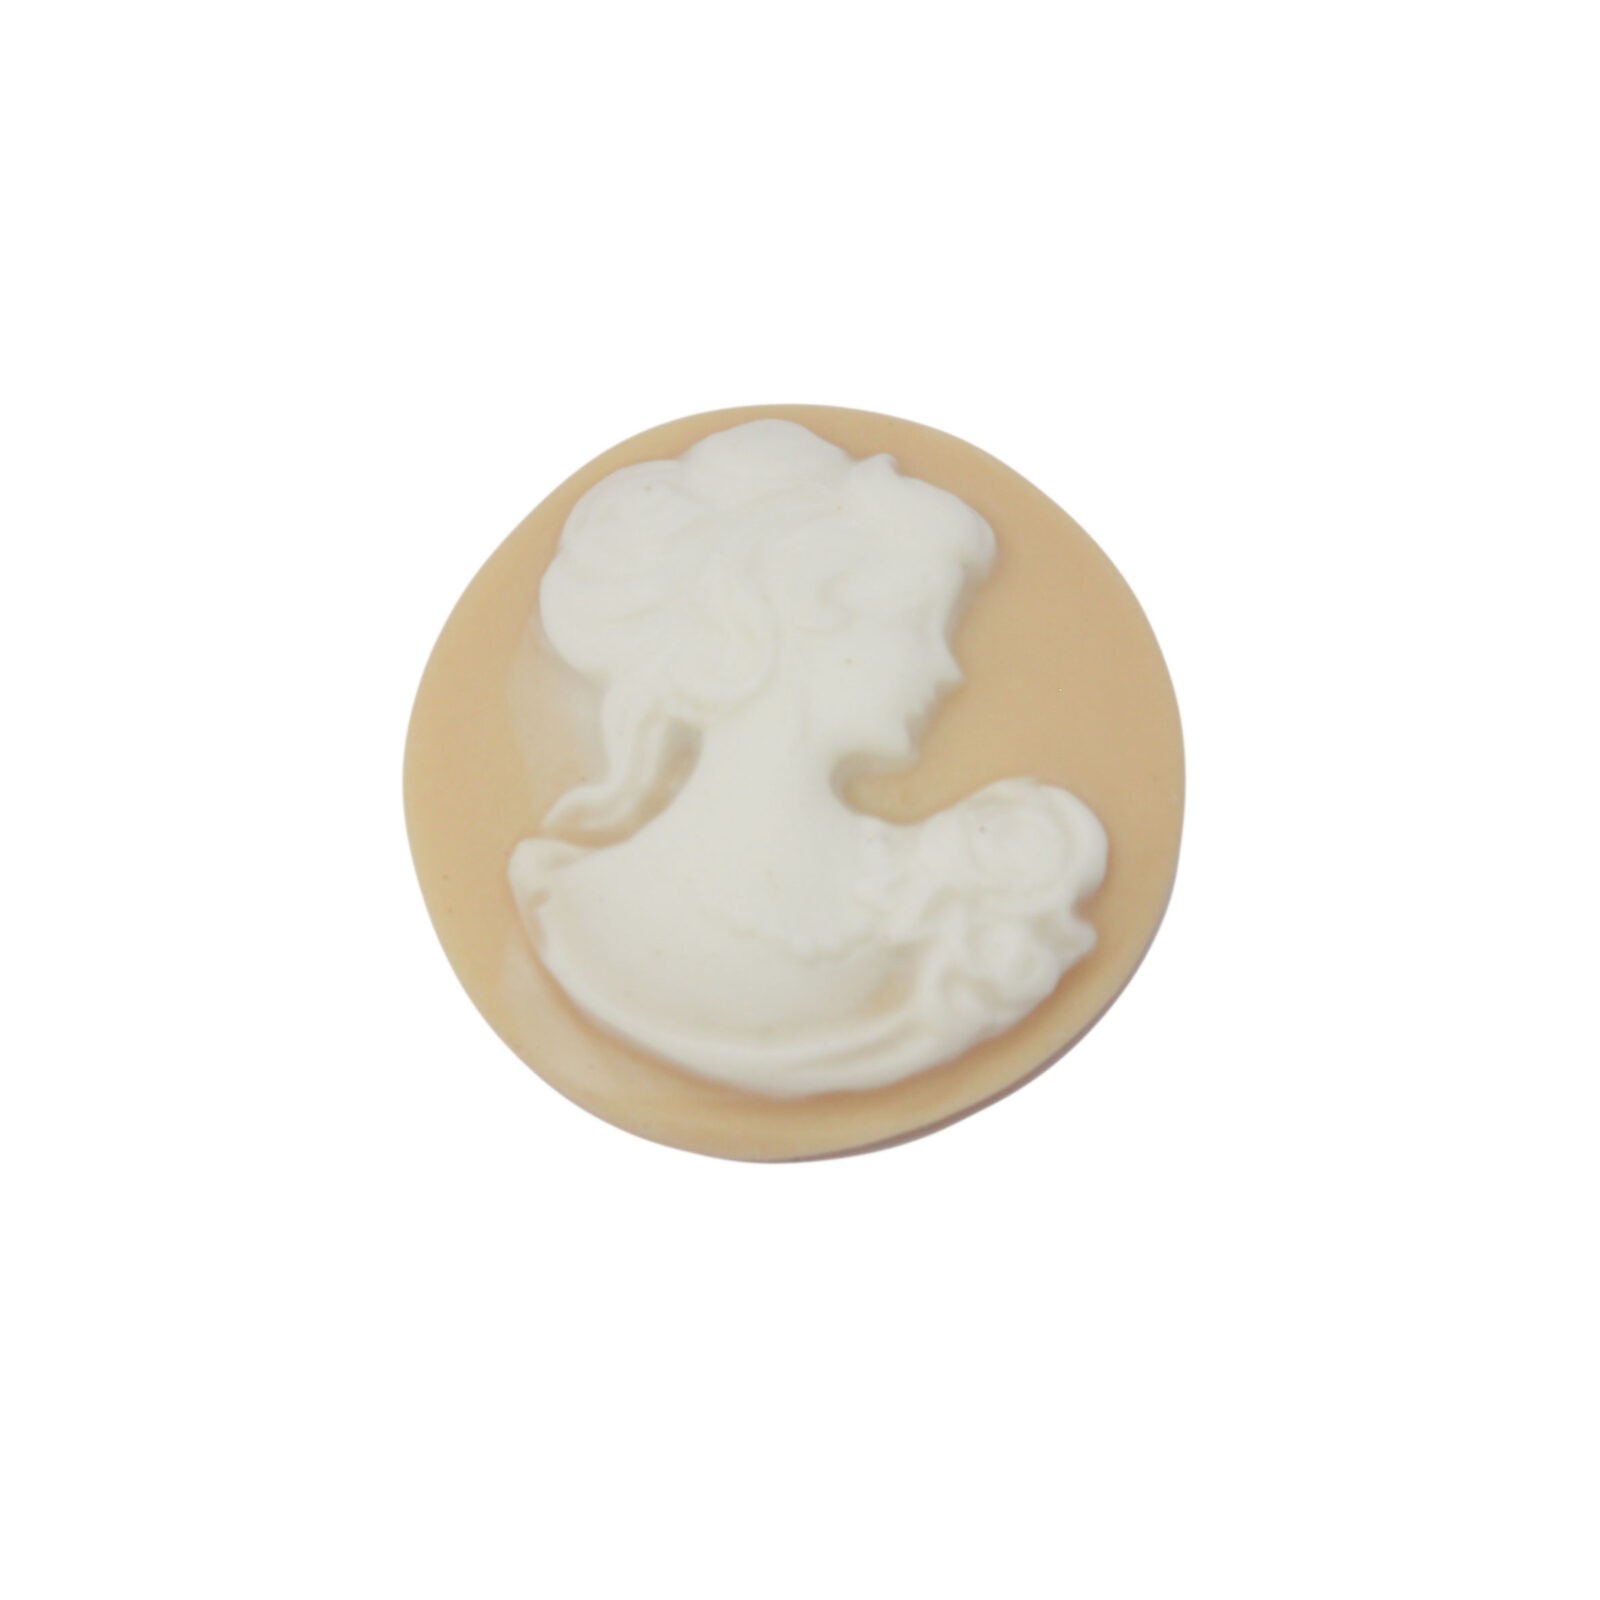 Bruine/witte rond cabochon camee - vrouw